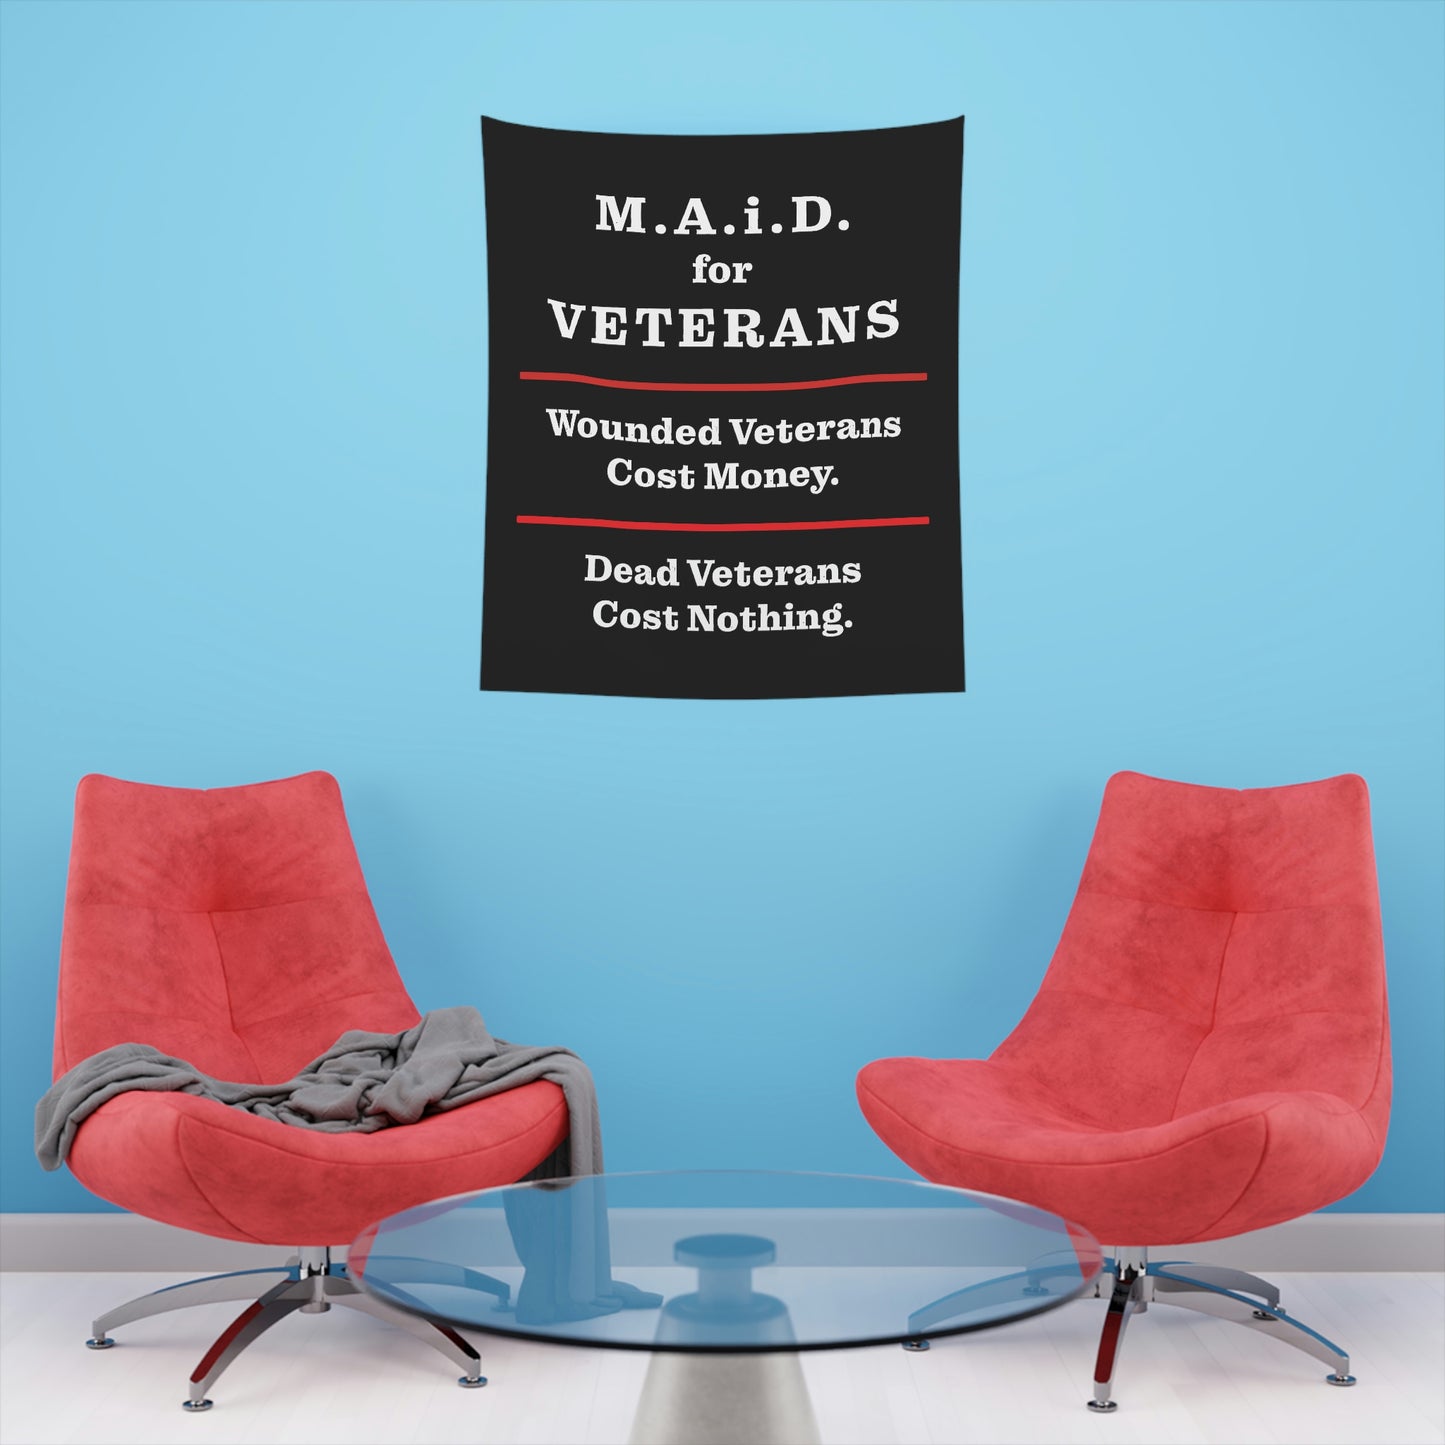 M.A.i.D. for Veterans - Wall Tapestry